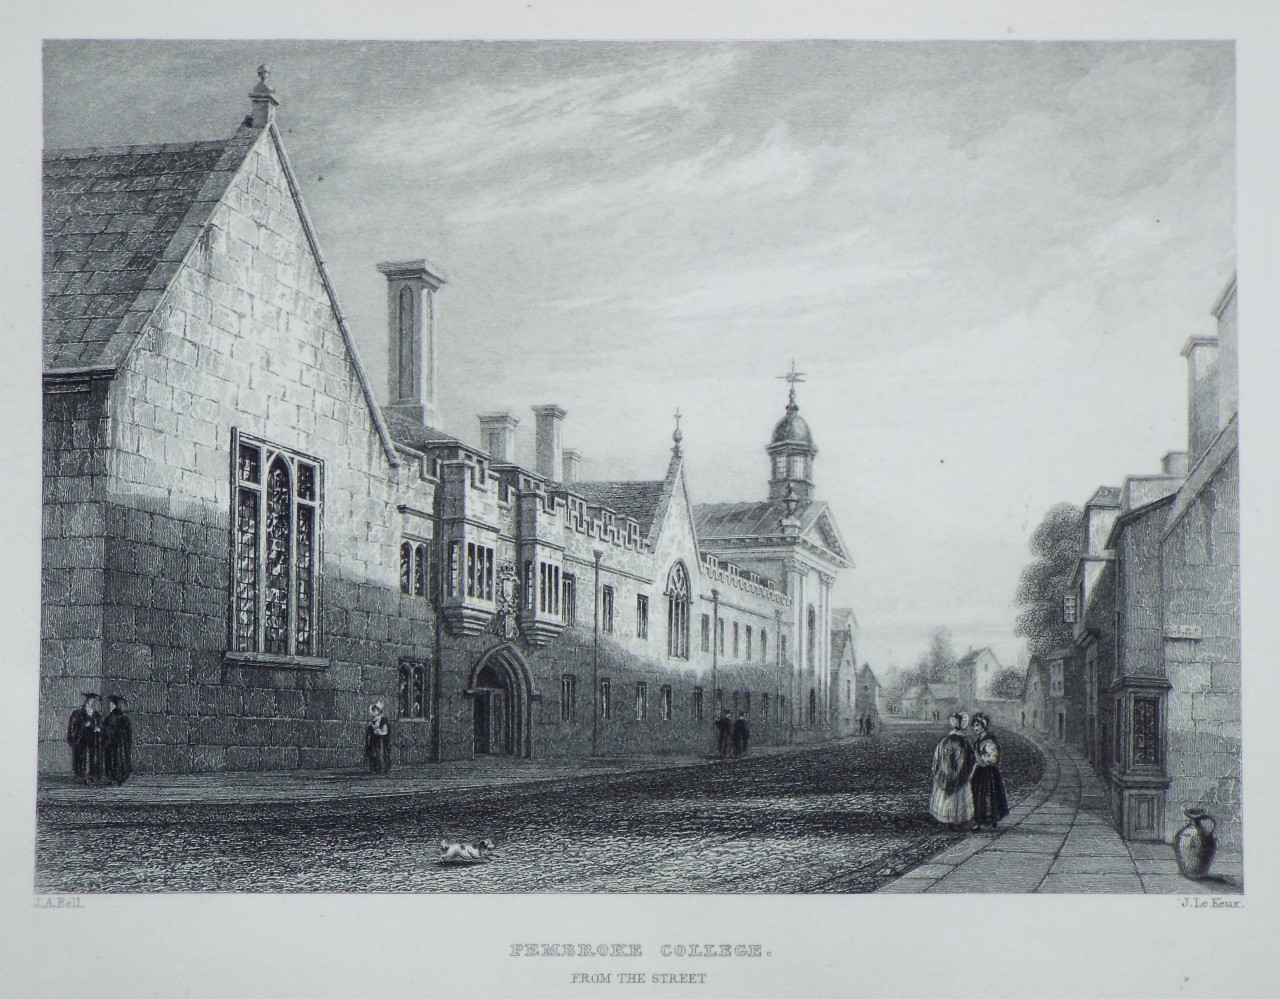 Print - Pembroke College. From the Street.